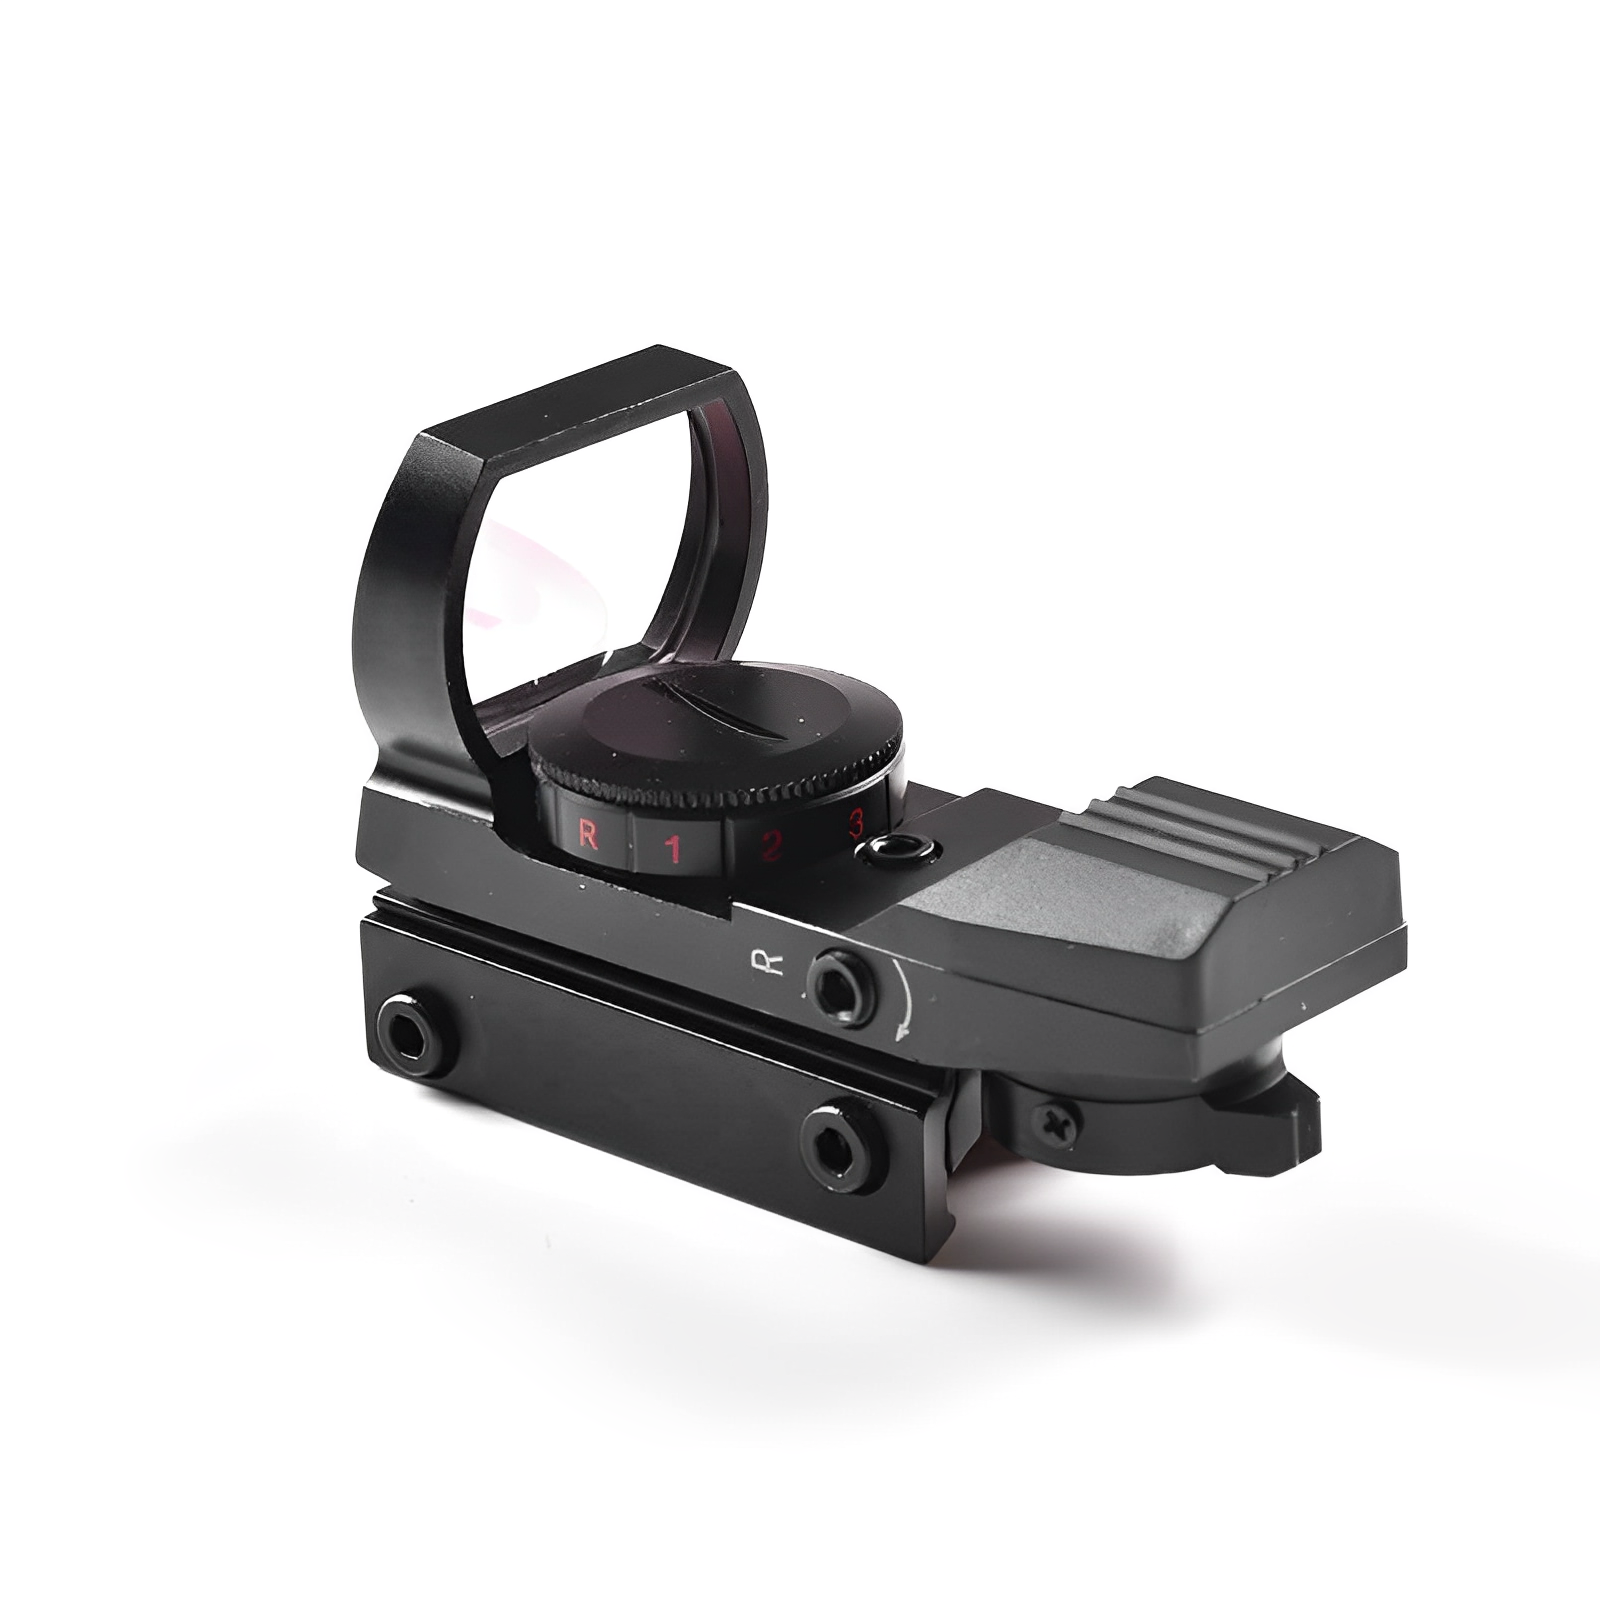 HOLOGRAPHIC REFLEX RED DOT SIGHT